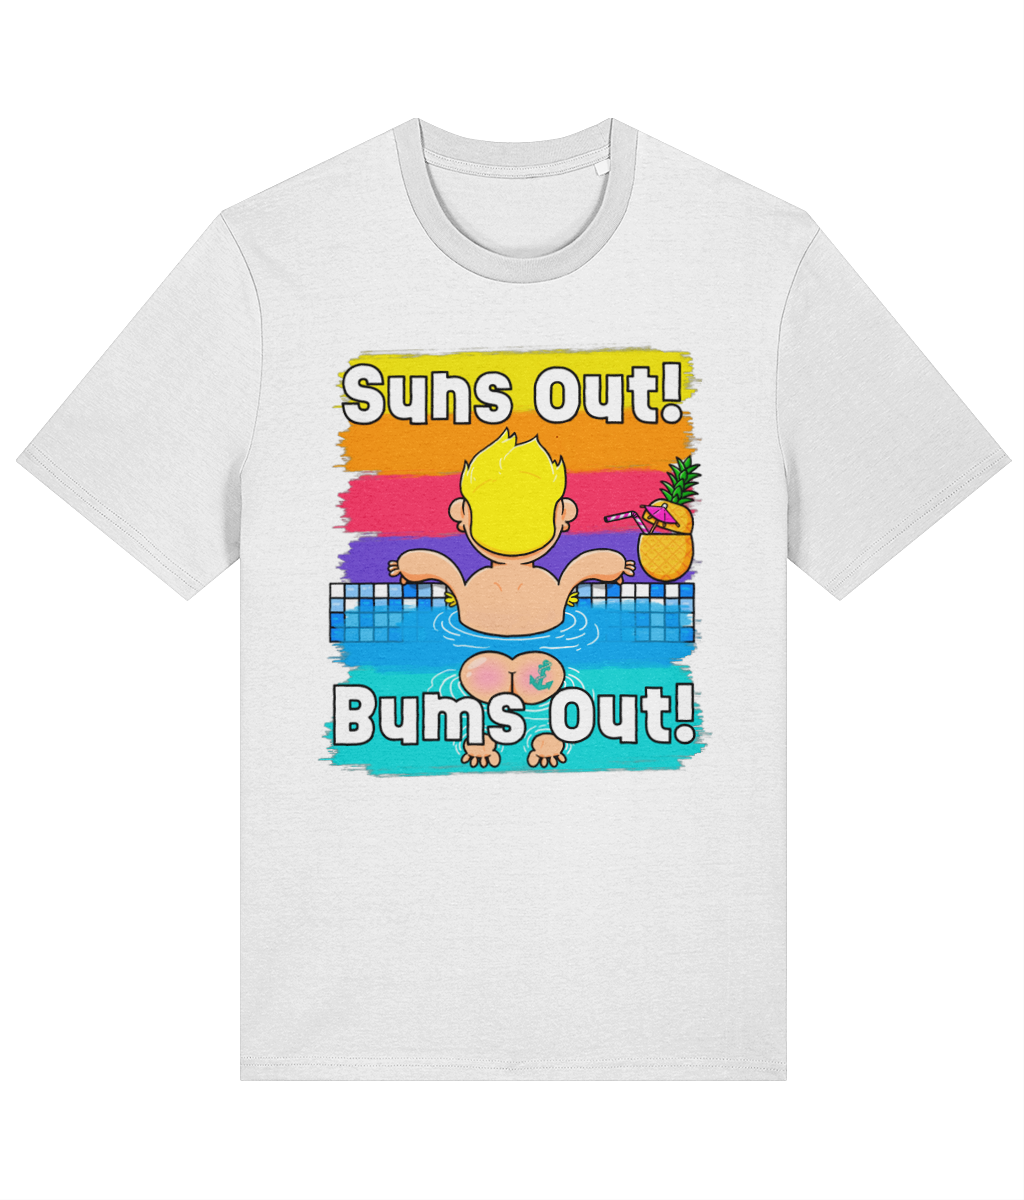 Suns out! Bums out! T-Shirt